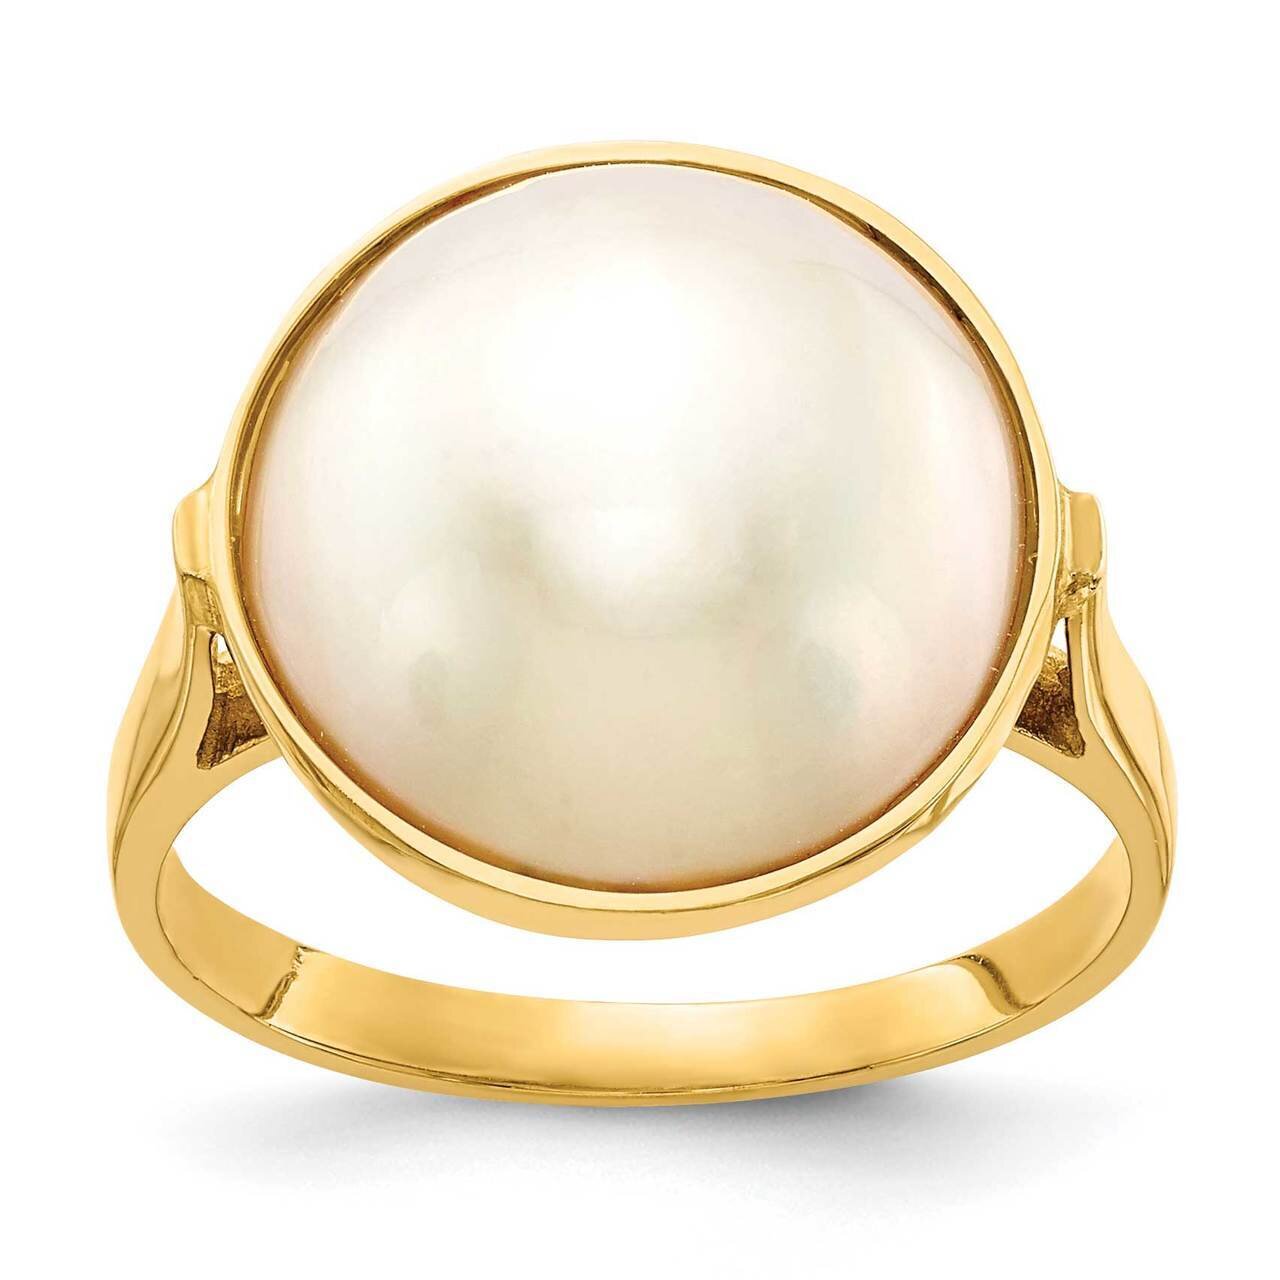 13-14mm Freshwater Cultured Mabe Pearl Ring 14k Gold Y13943PL